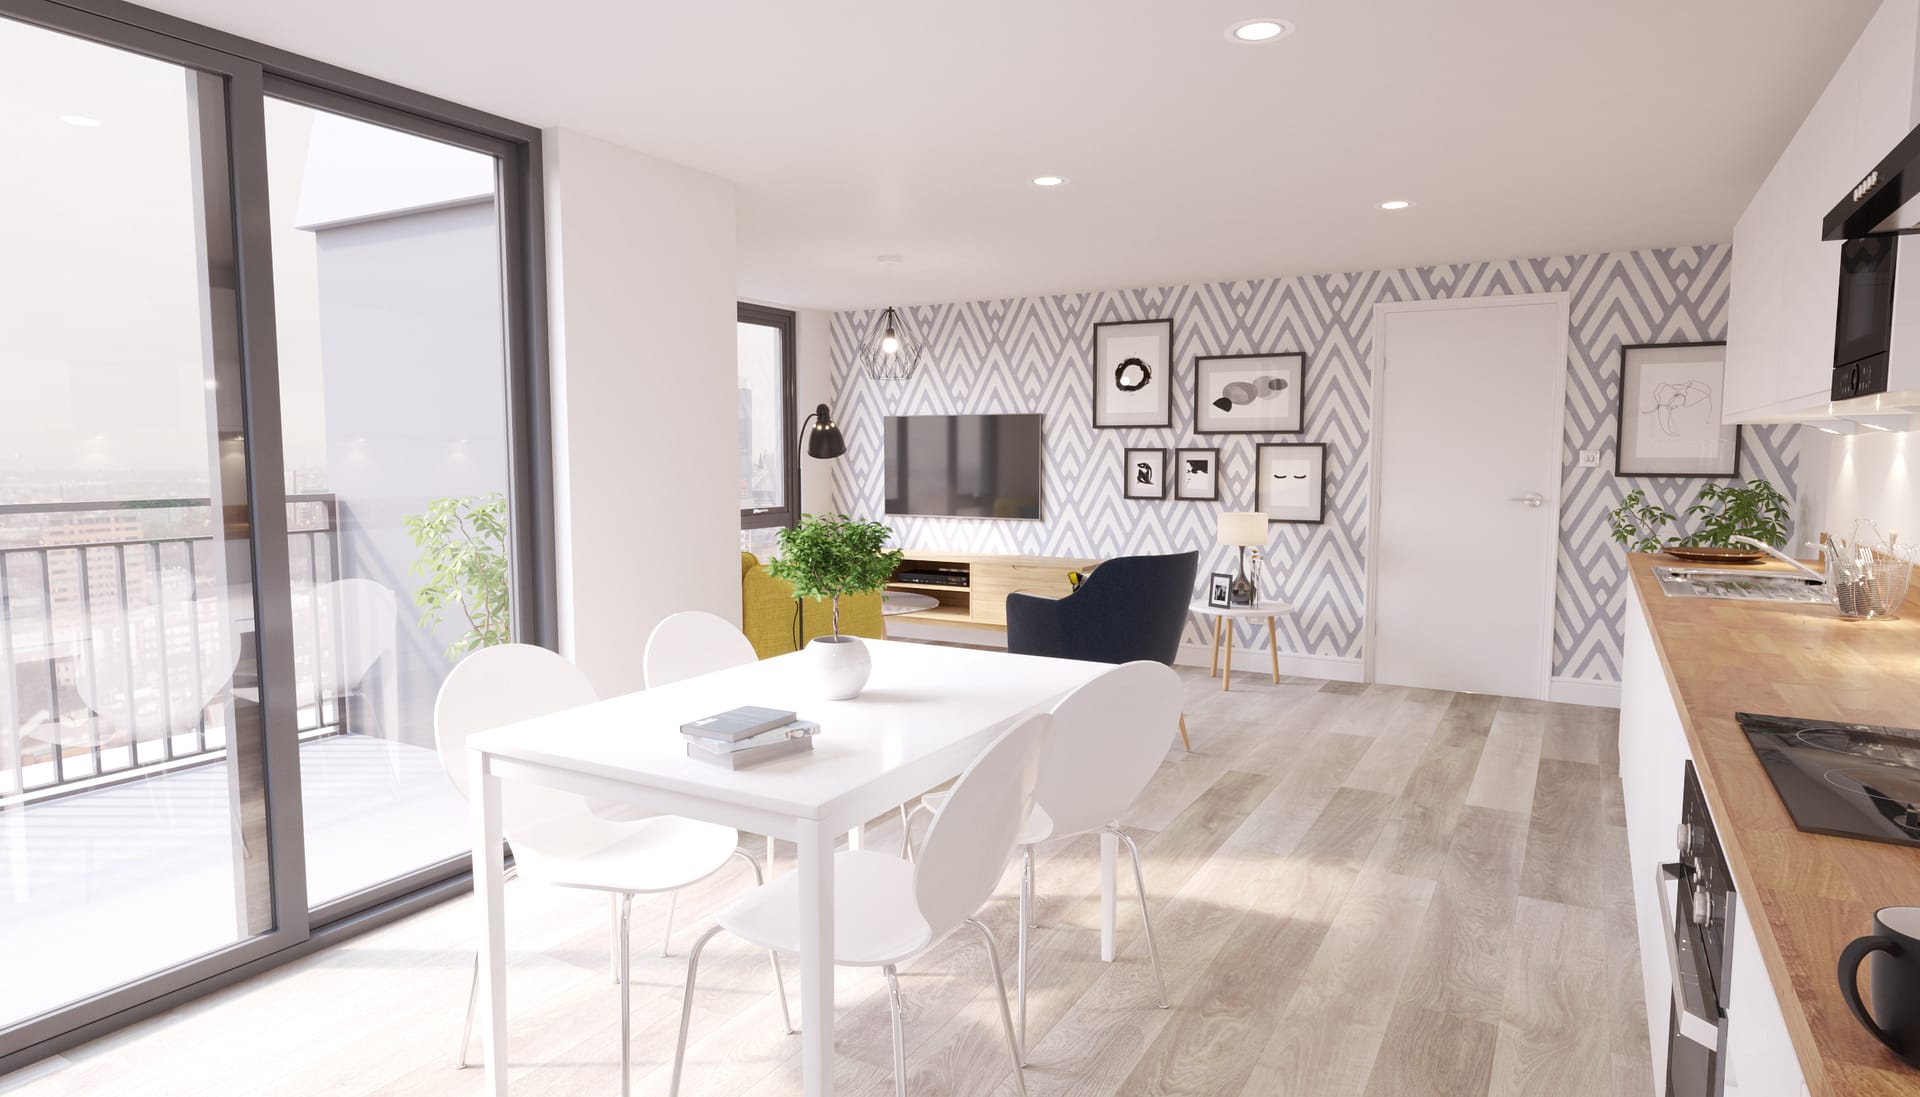 MCR Homes launches luxury penthouse apartments in Norwich